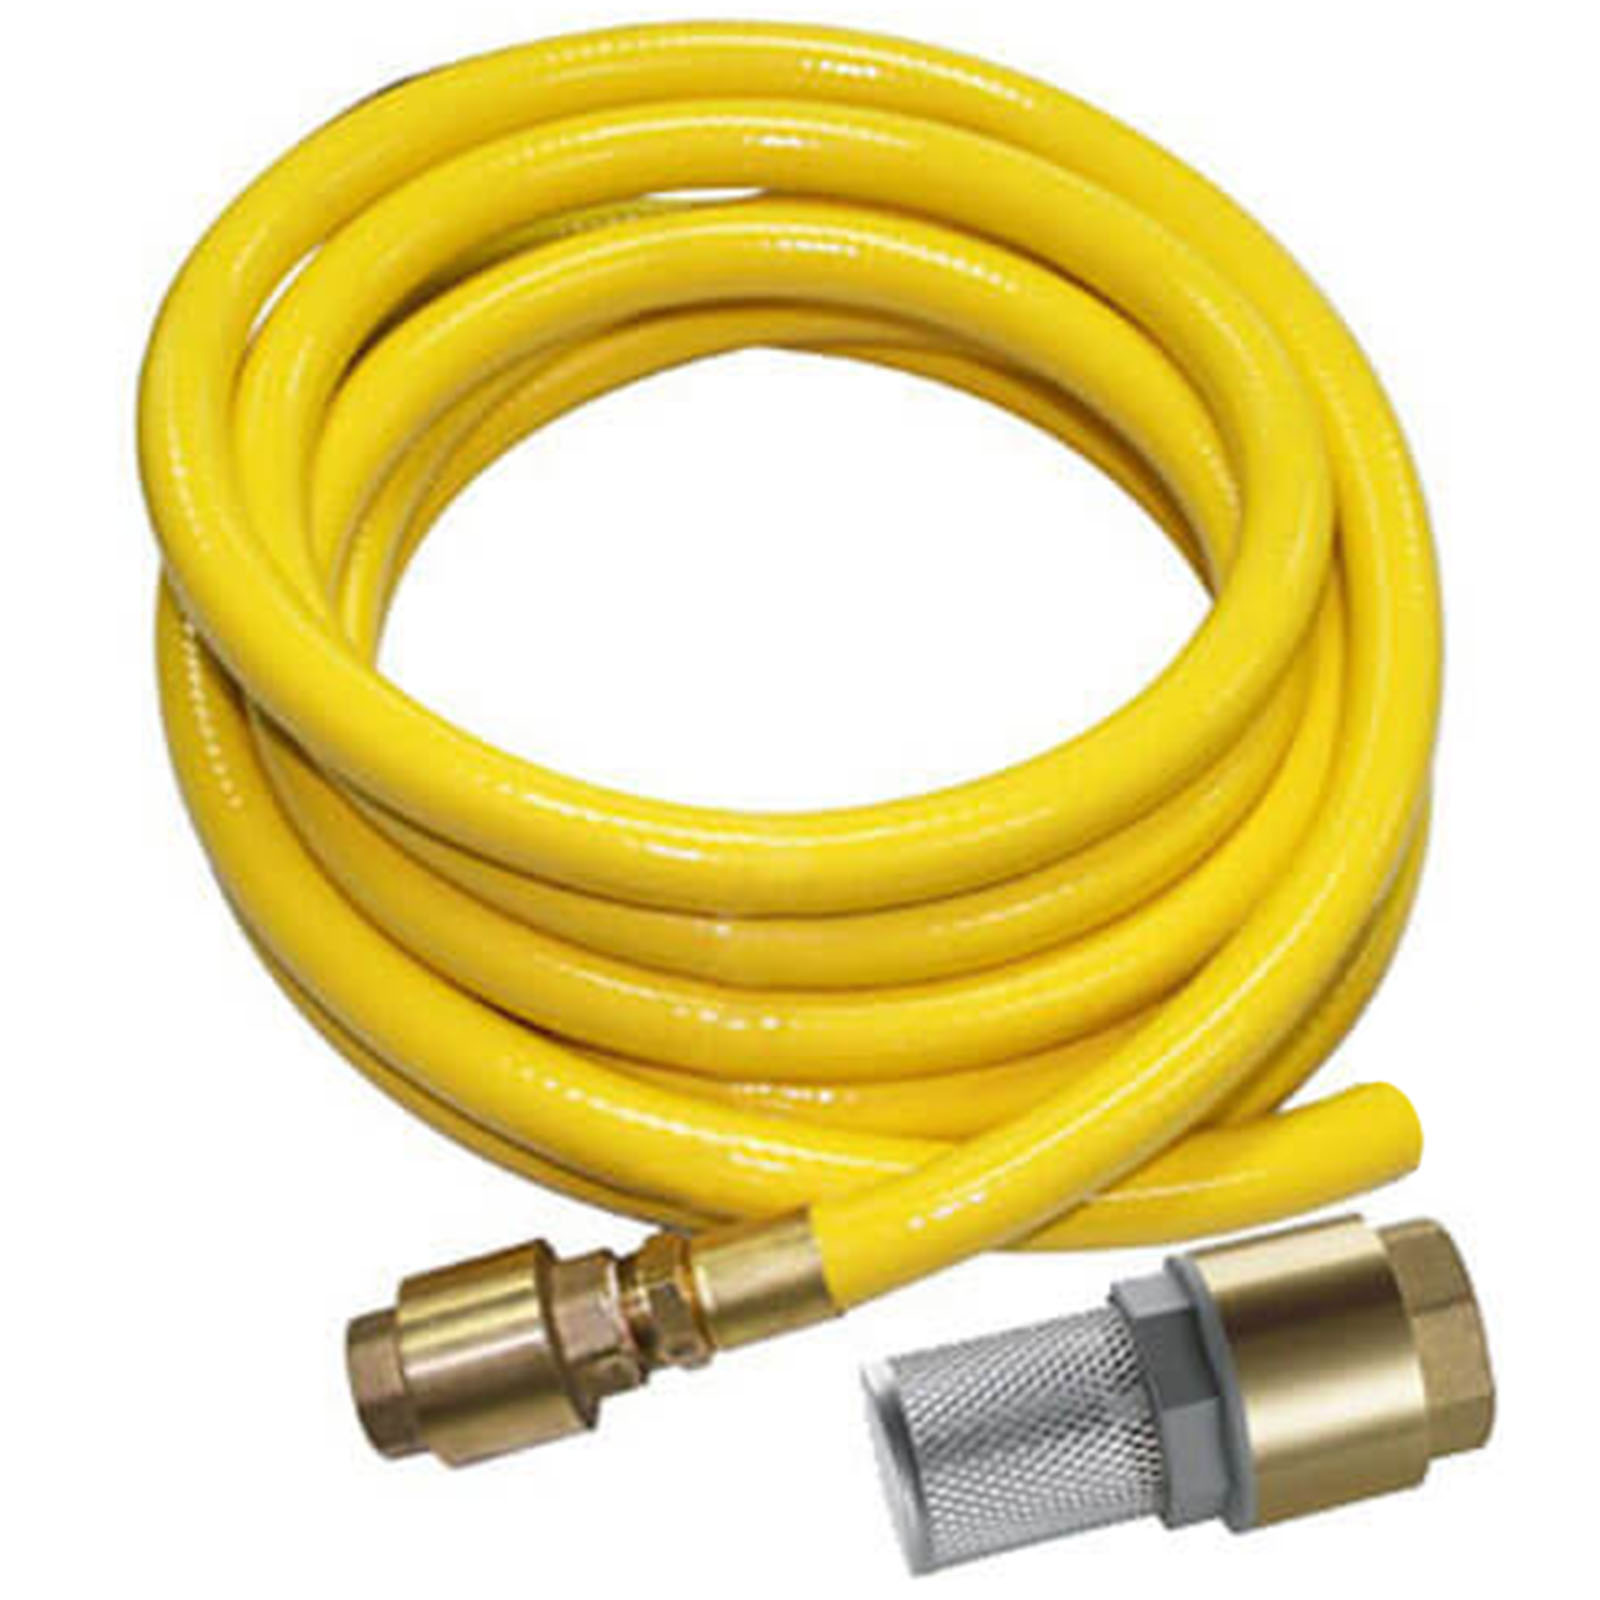 Image of Karcher Suction Hose and Filter for HD and XPERT Pressure Washers 3m